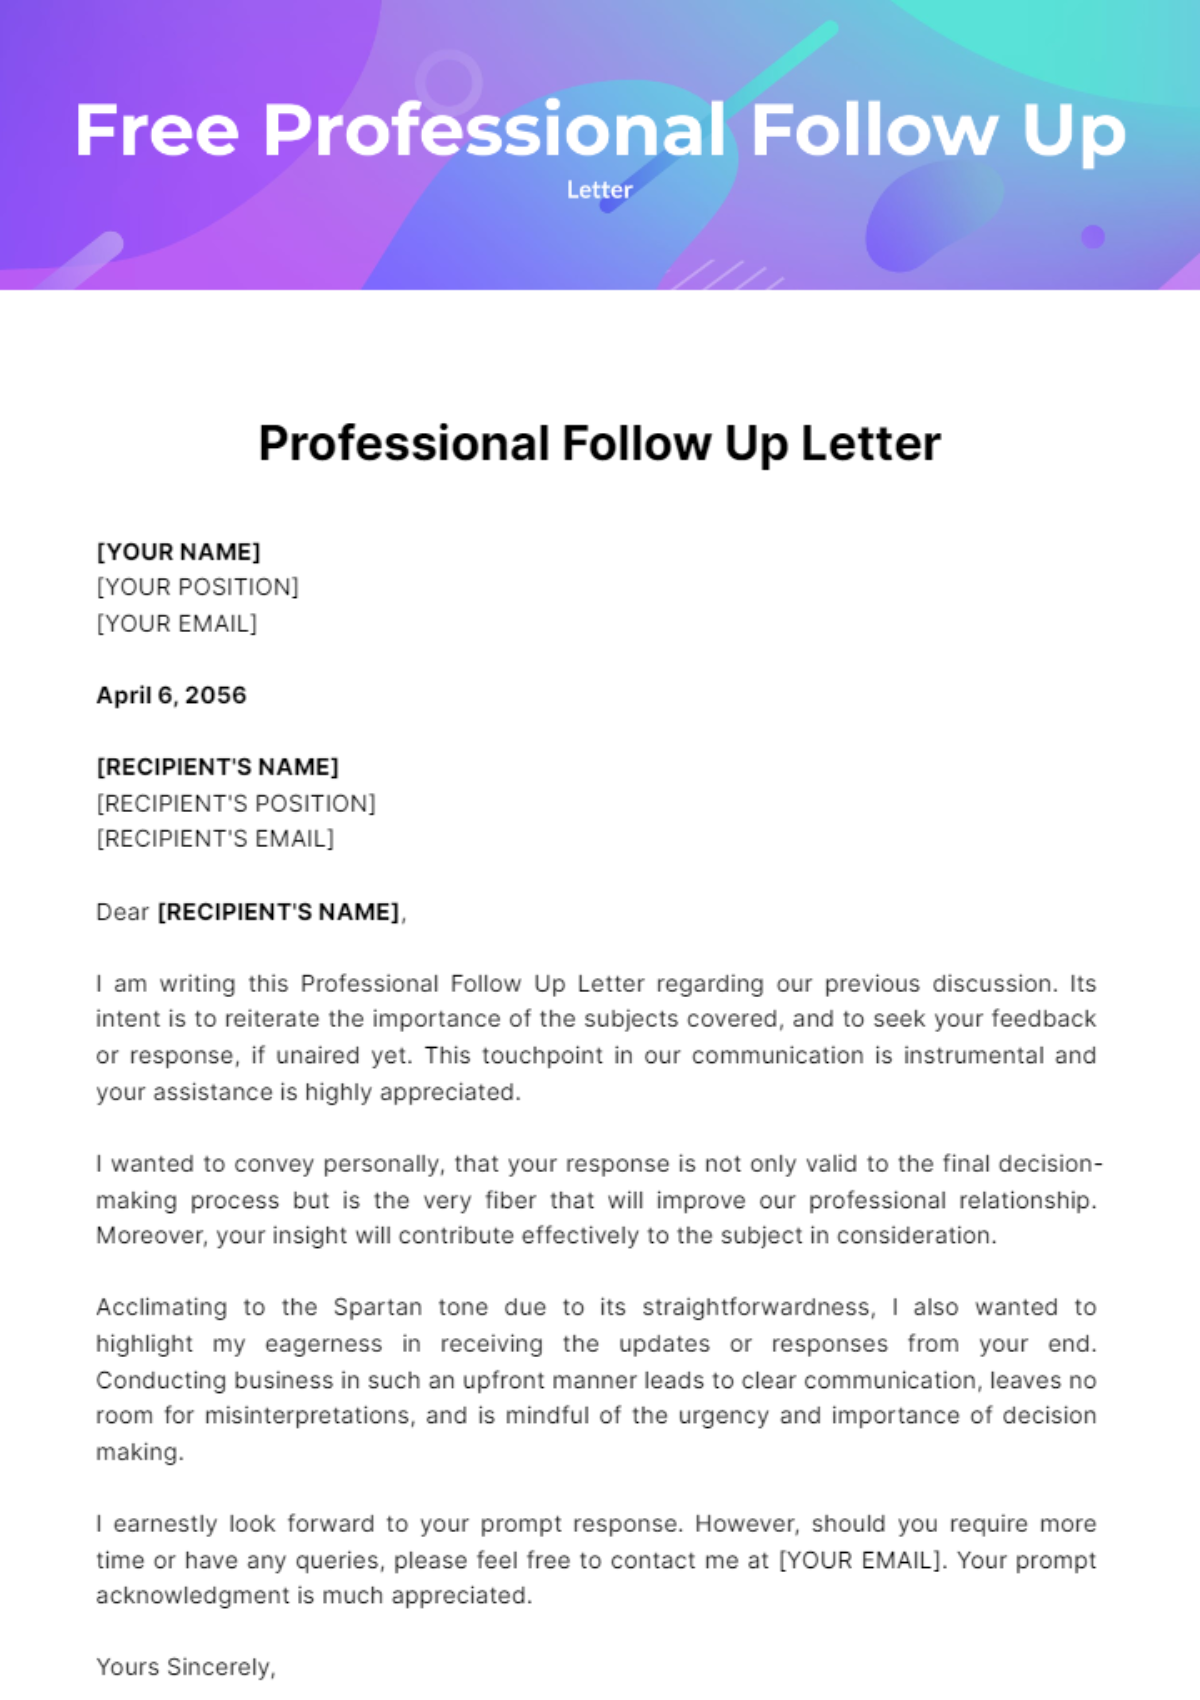 Free Professional Follow Up Letter Template